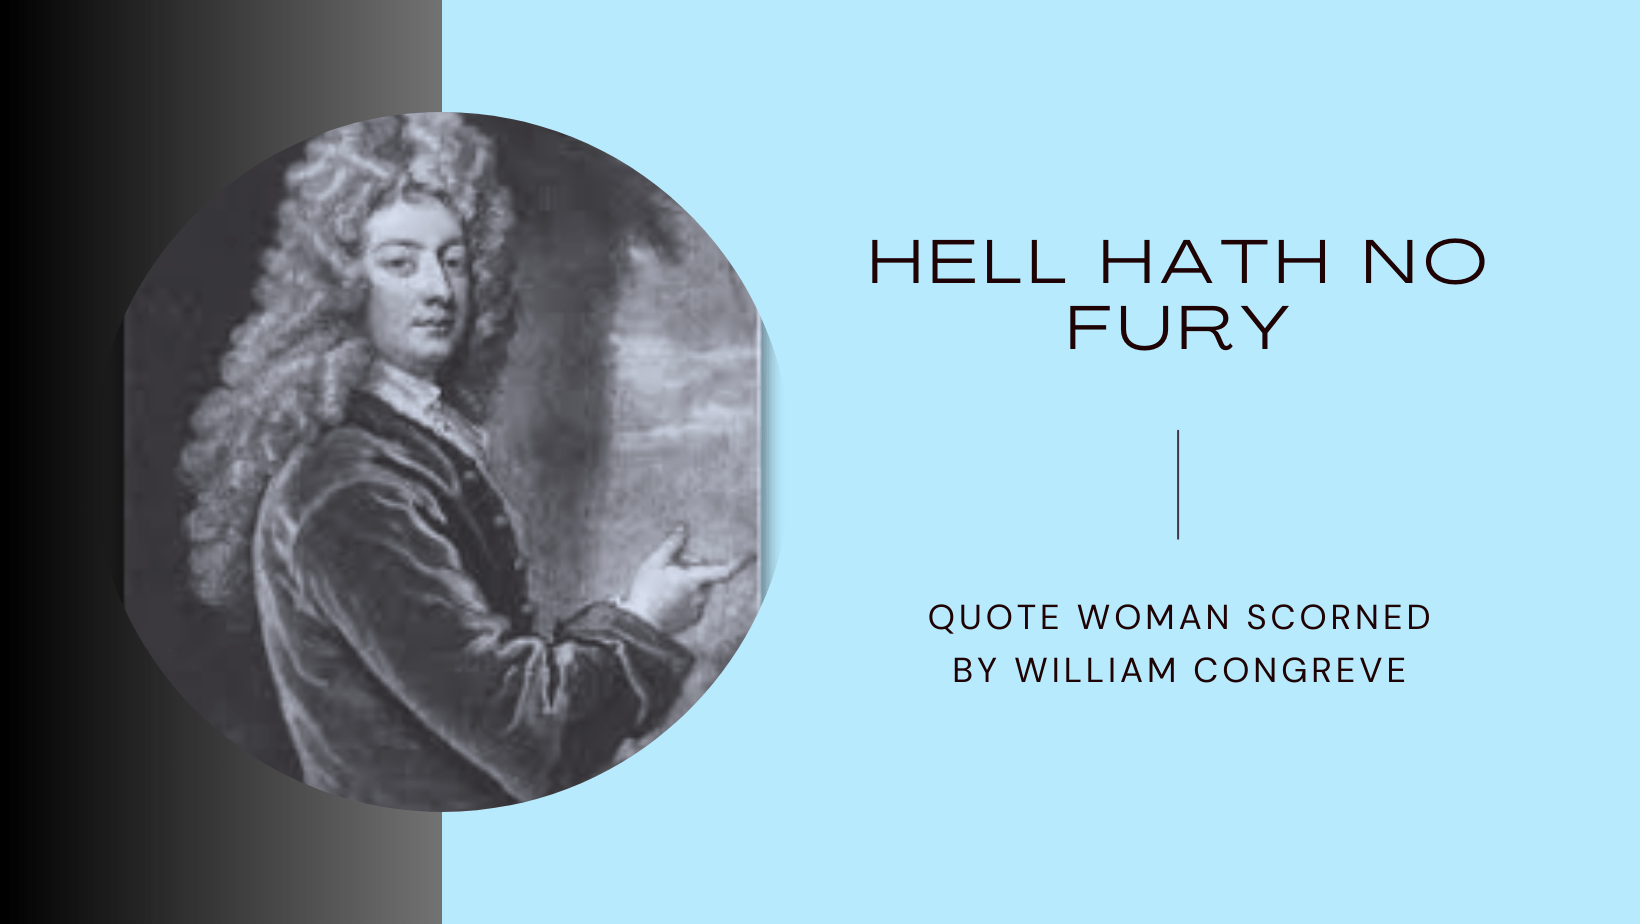 Quote Woman Scorned by William Congreve